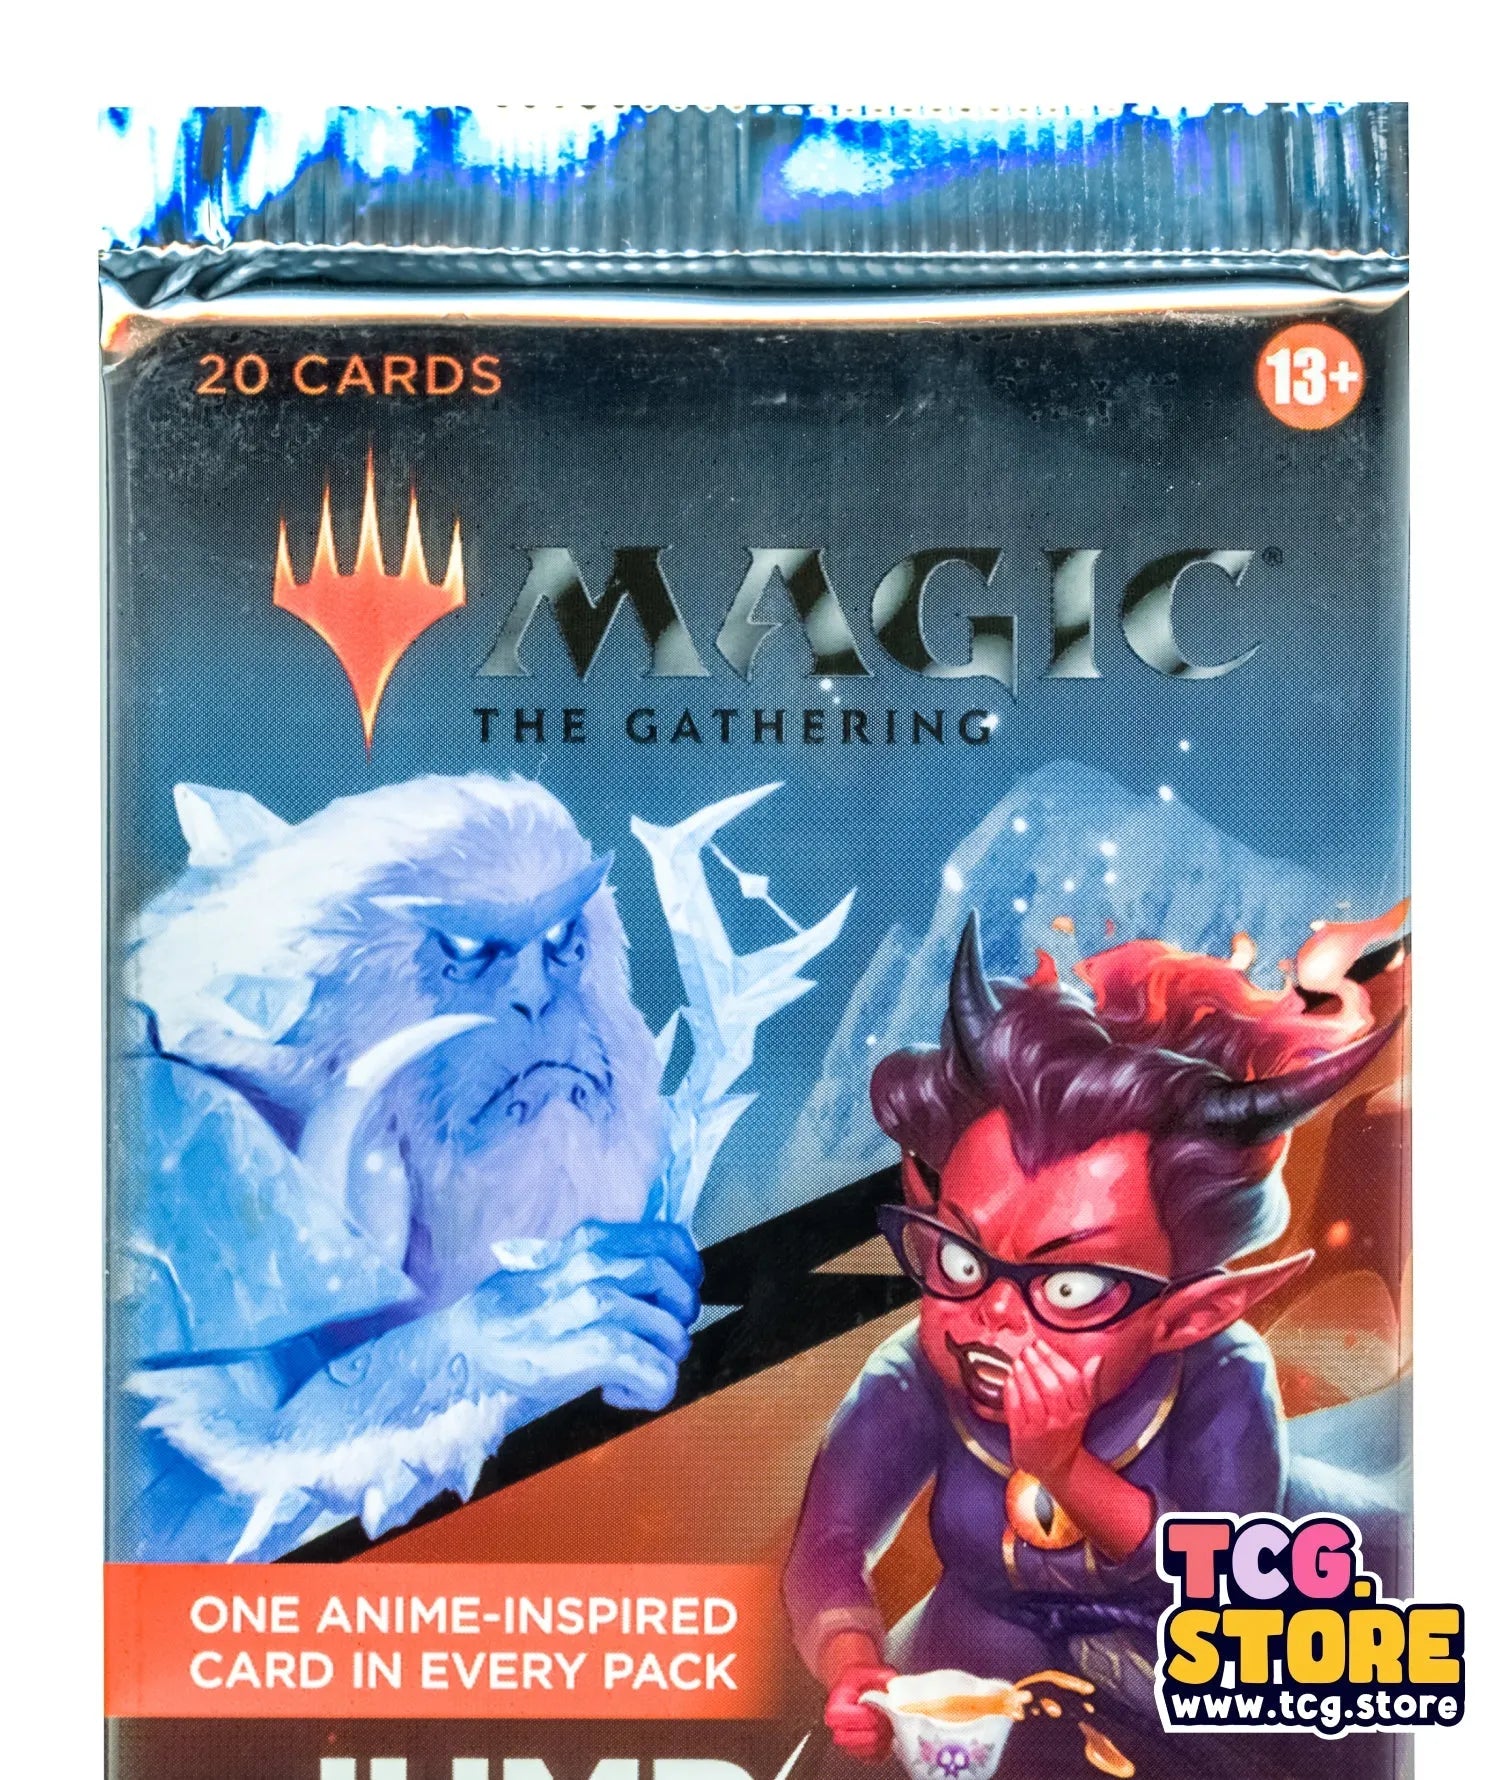 1 Pack - Magic: The Gathering - Jumpstart 2022 Booster Pack (20 cards) - Sealed - TCG.Store